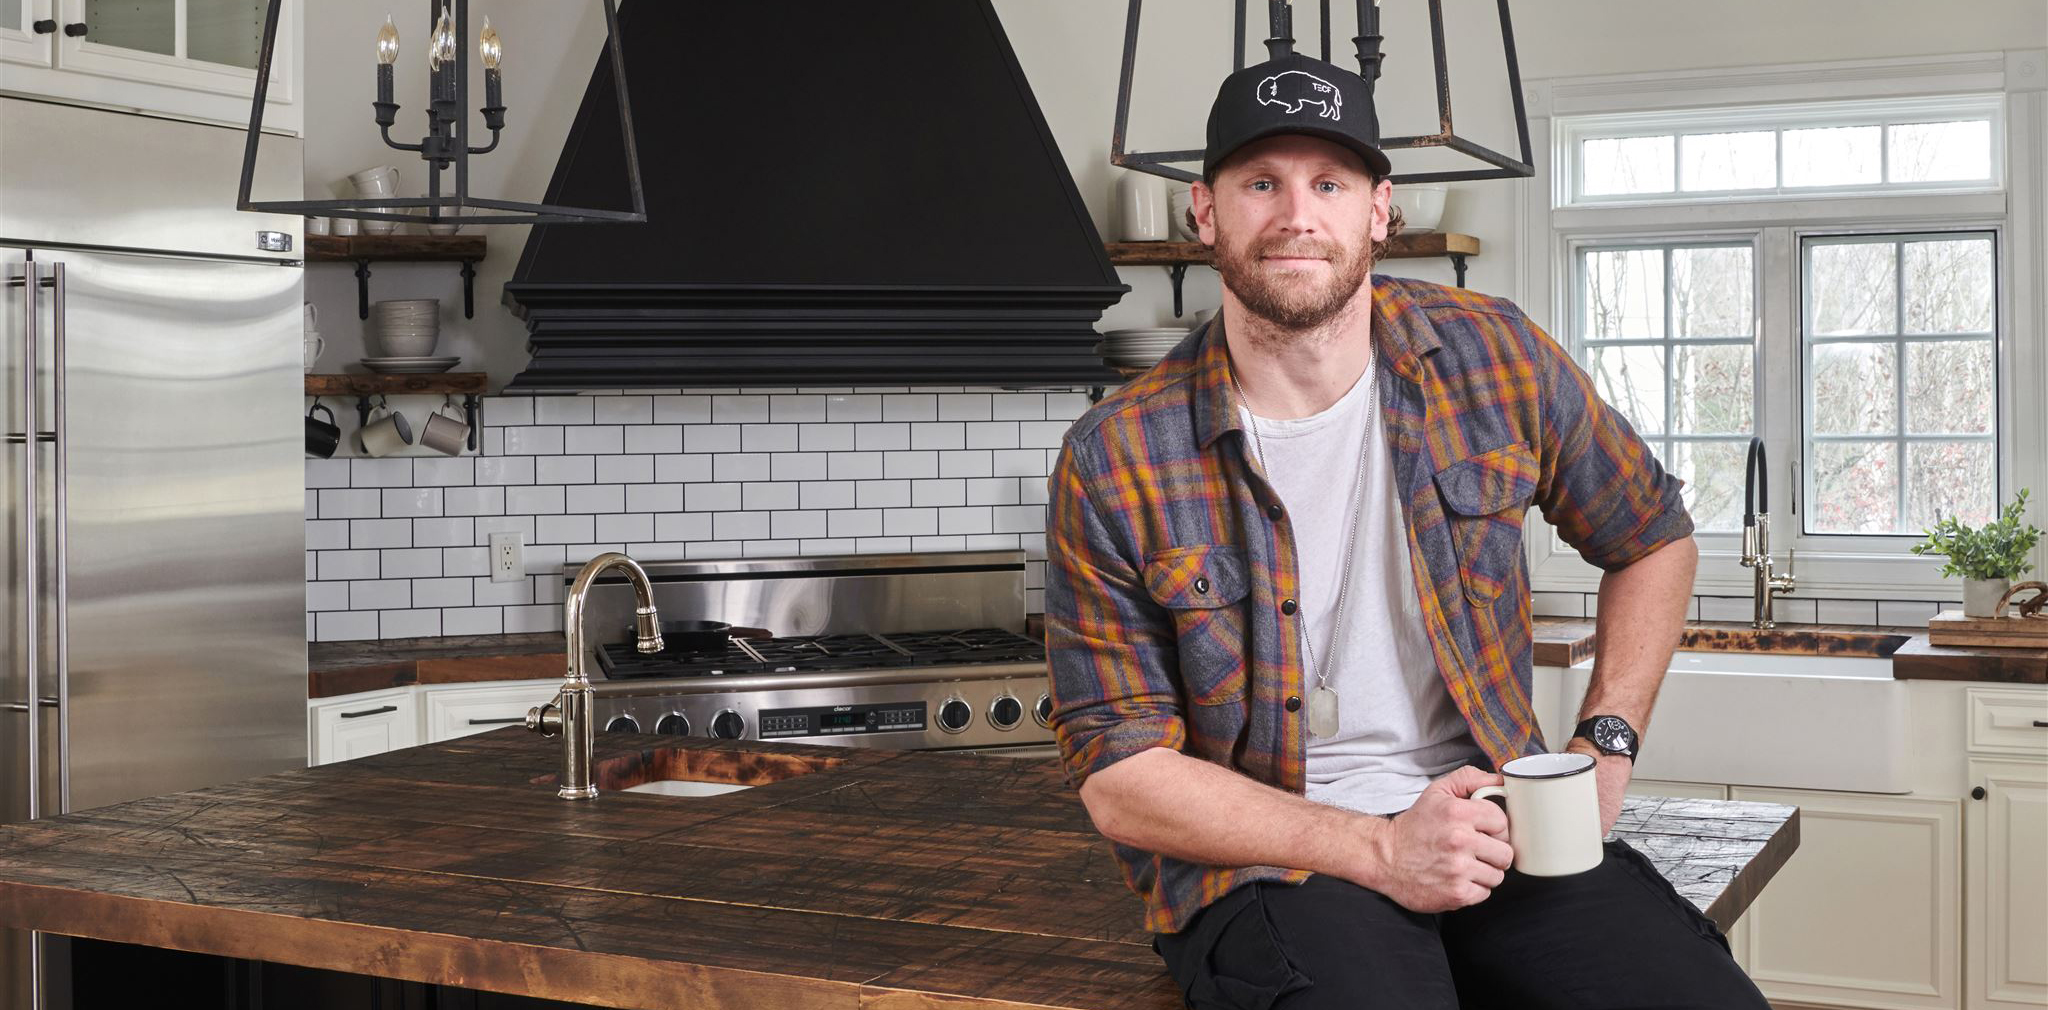 Chase Rice uses Olde Wood Limited products